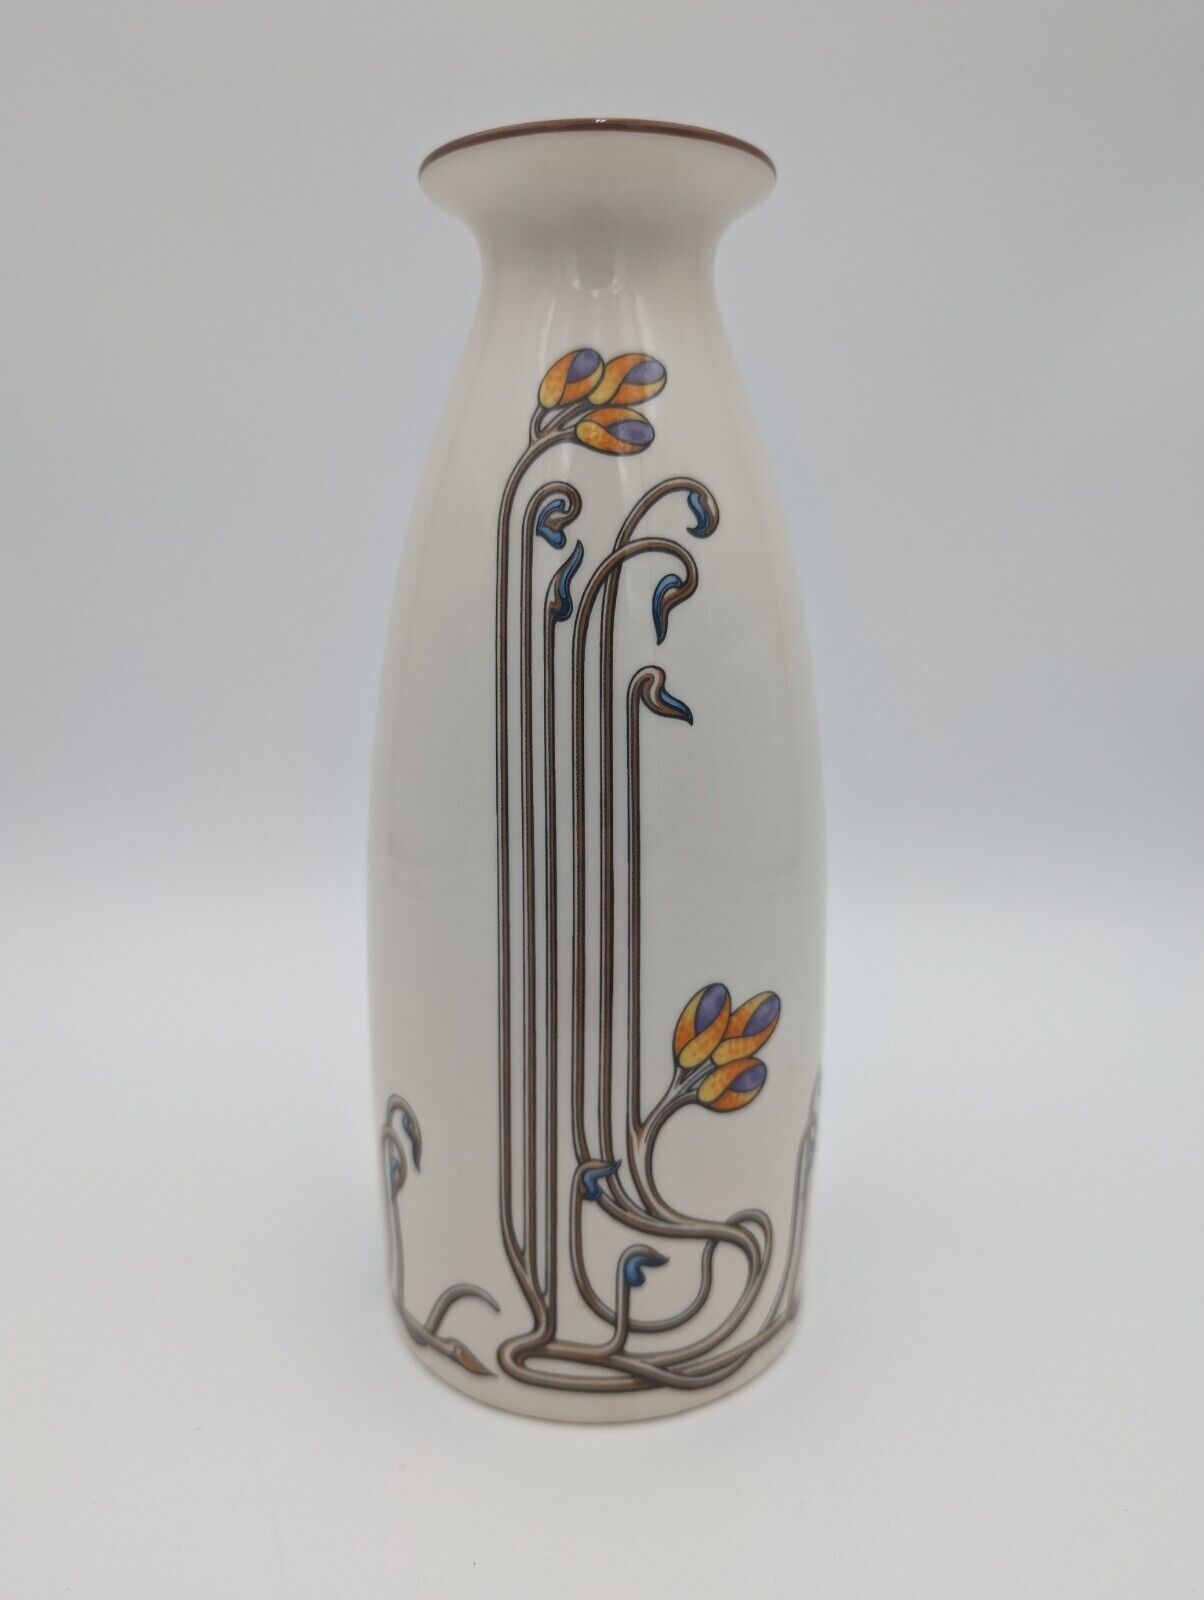 2001 Mason\'s Art Nouveau 8 1/4 Inch Tall Decorative Vase - Made in England